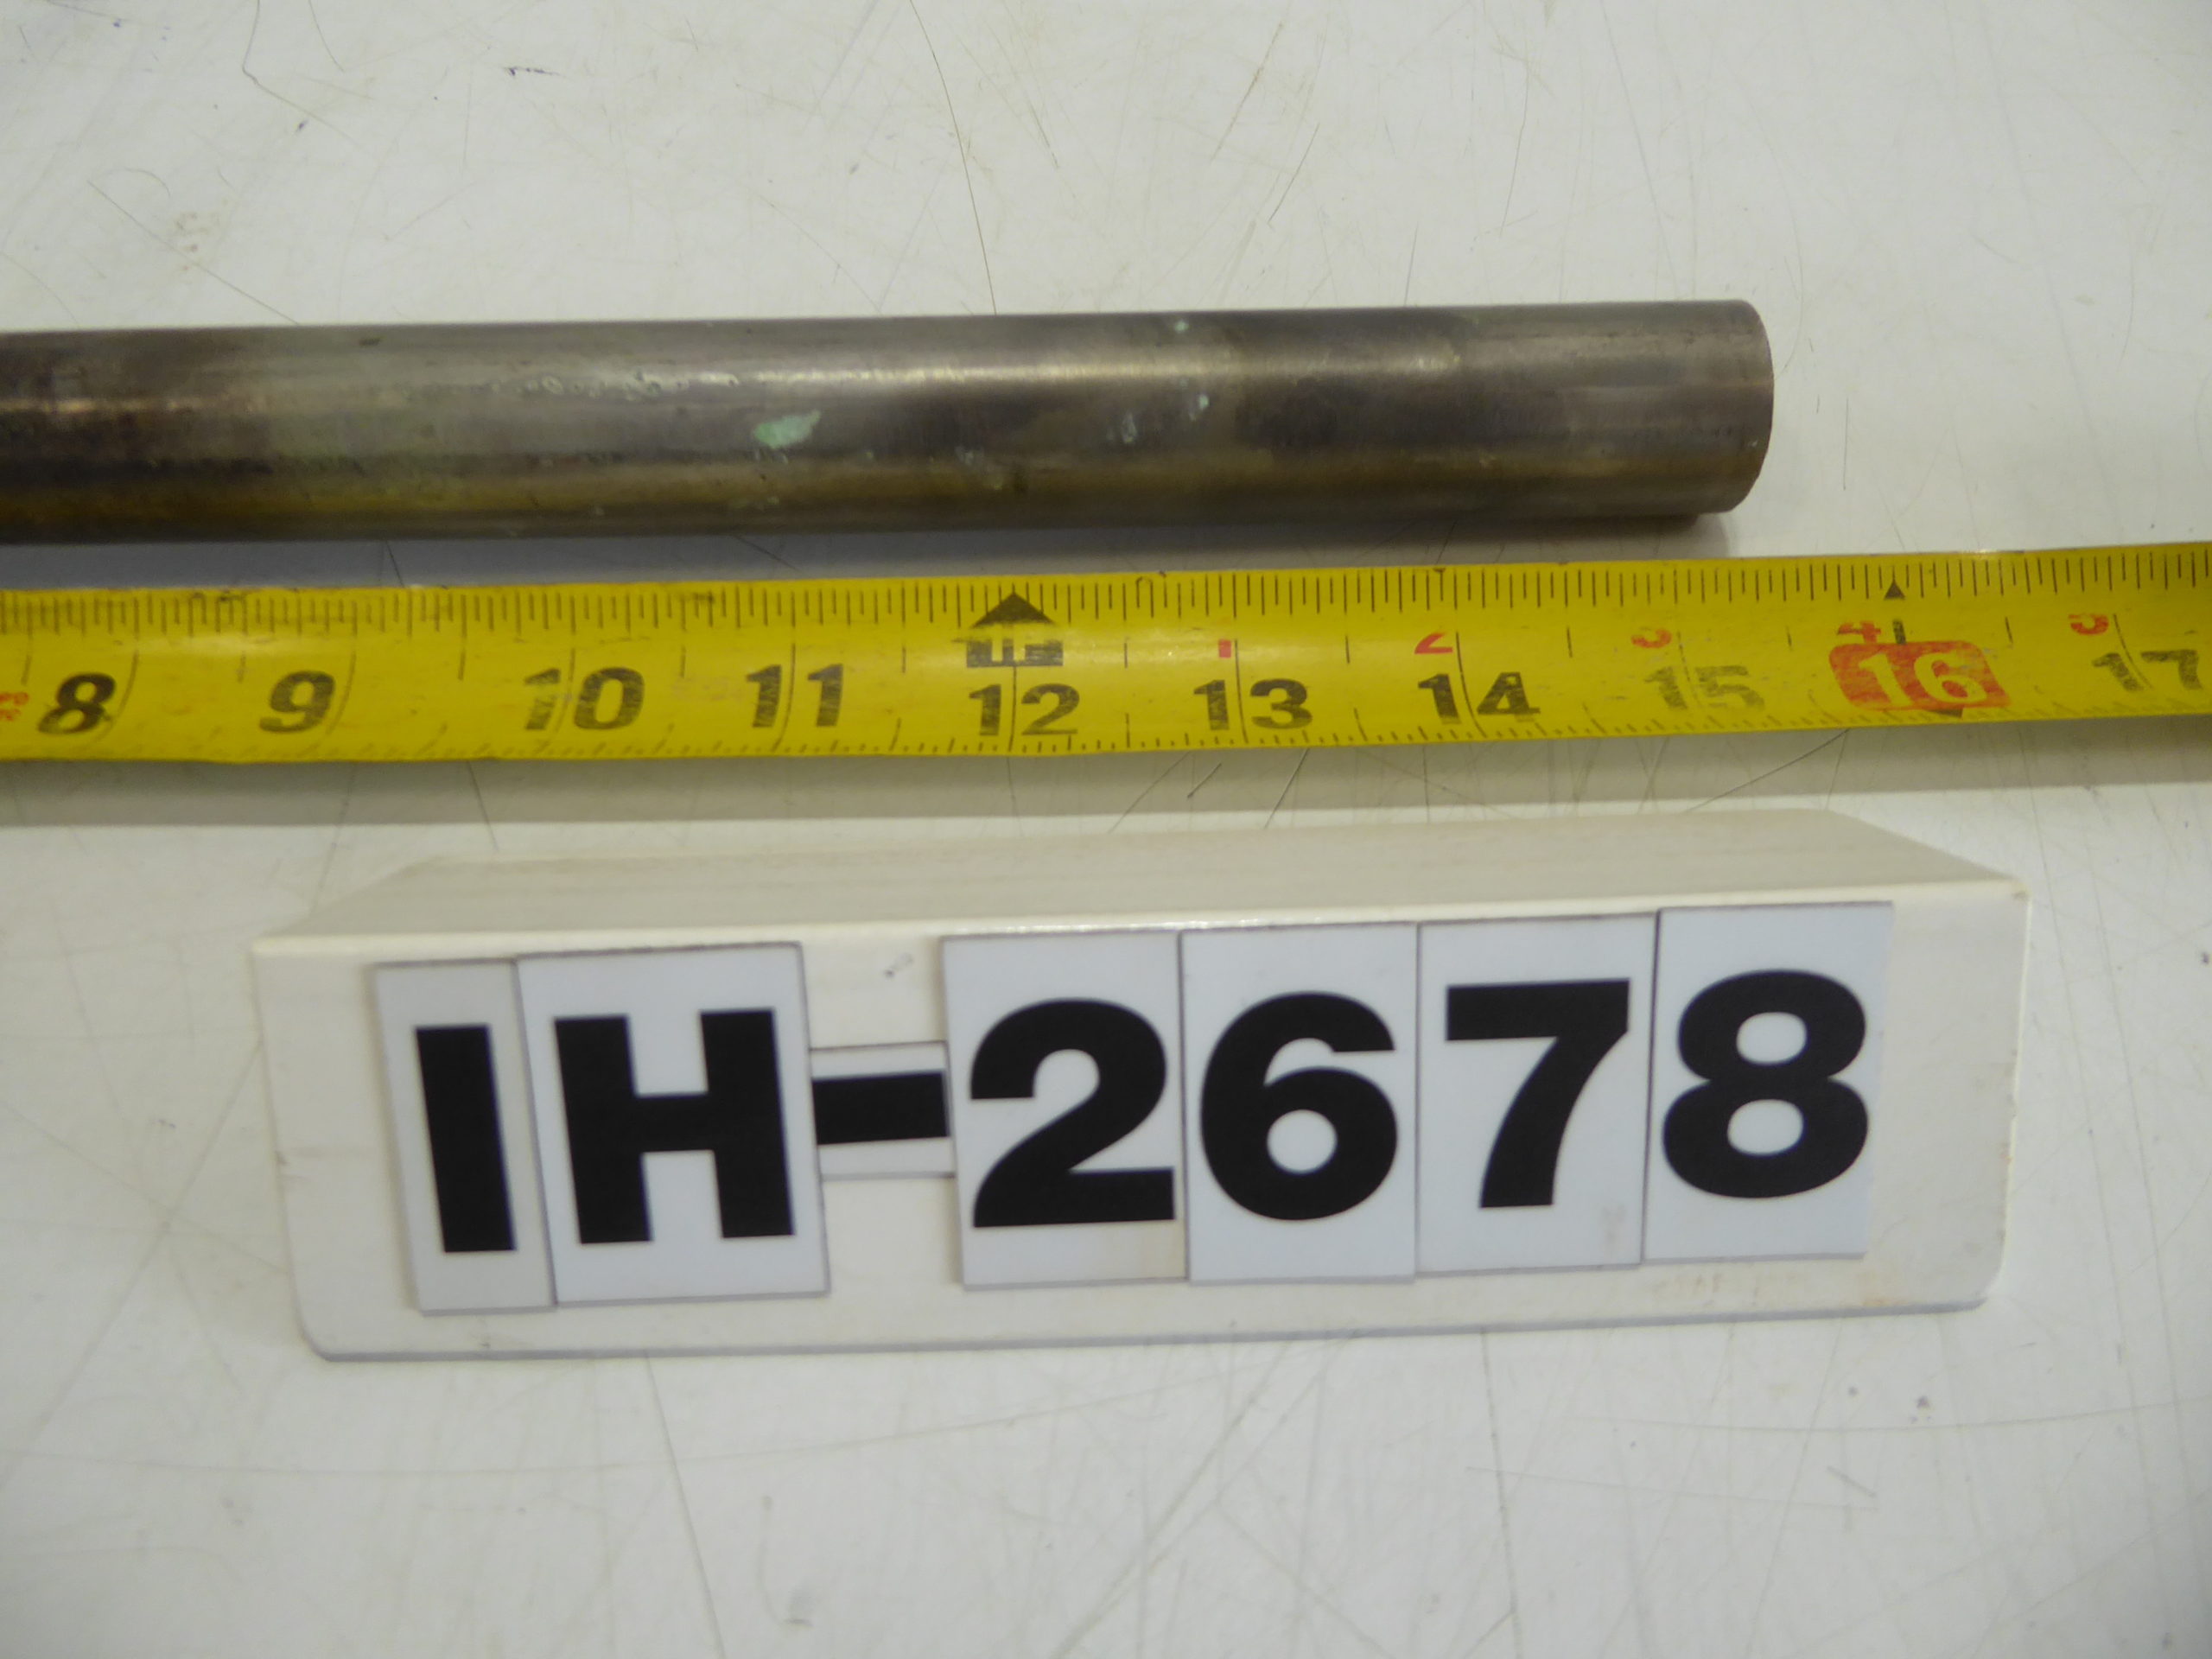 Used Immersion Heater - Rotkaeppchew Stainless Steel Immersion Heater IH2678-Immersion Heater